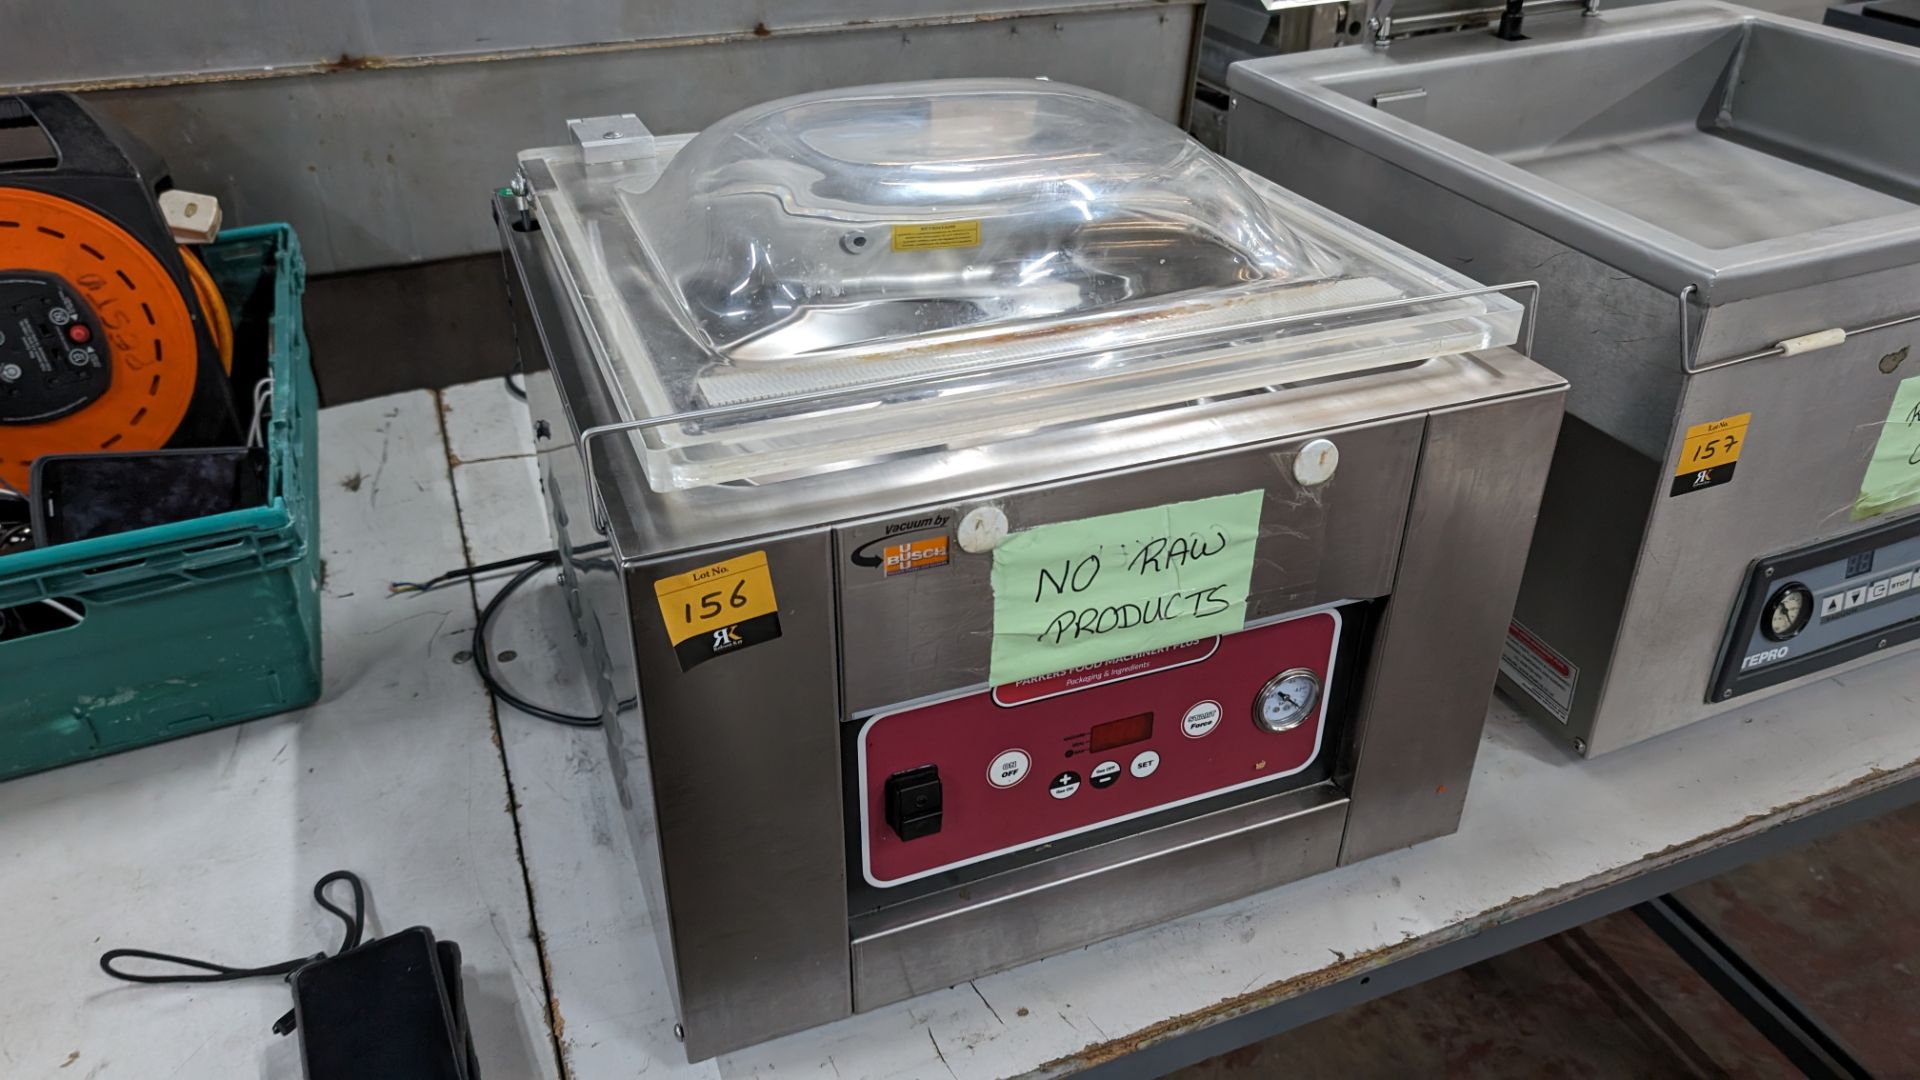 Parkers Food Machinery Plus benchtop stainless steel vacuum chamber machine, model Square 400